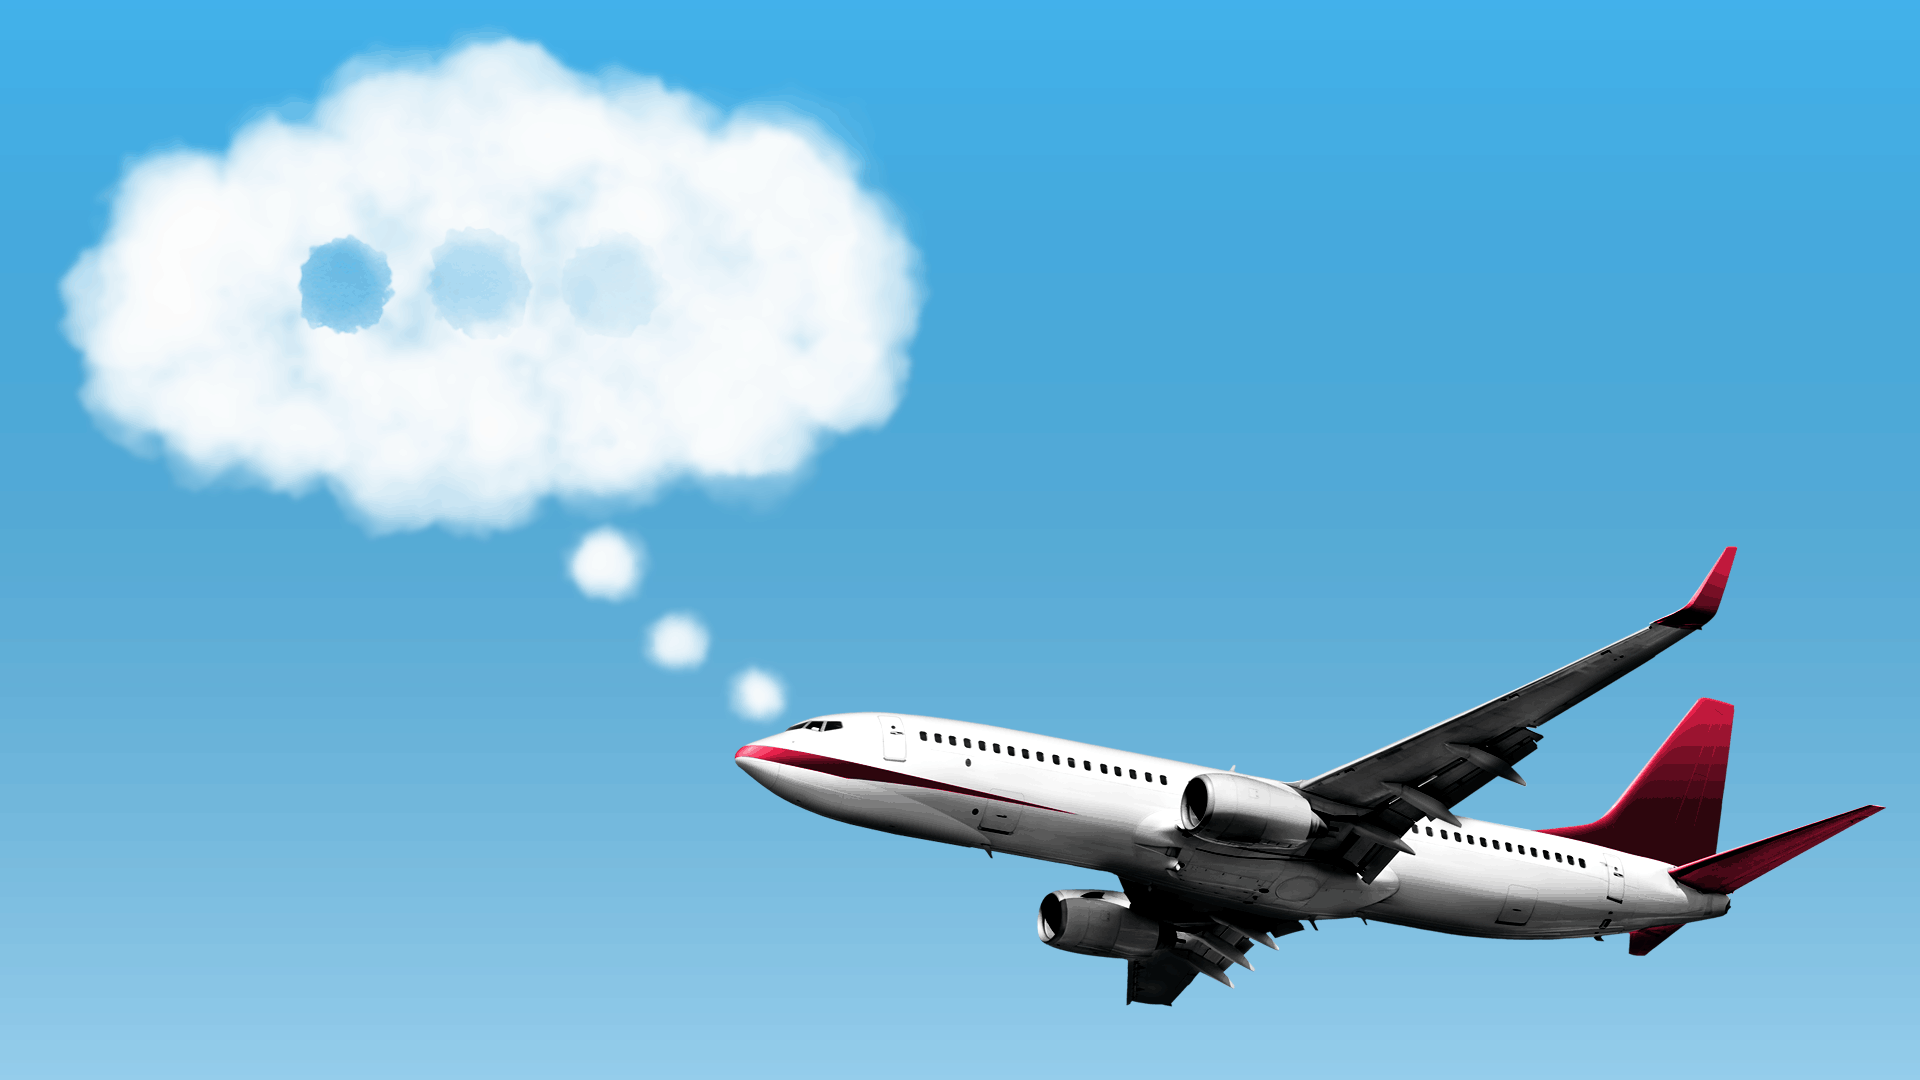 Gif of an airplane with a cloud-like thought bubble feating an animated text-in-progress icon